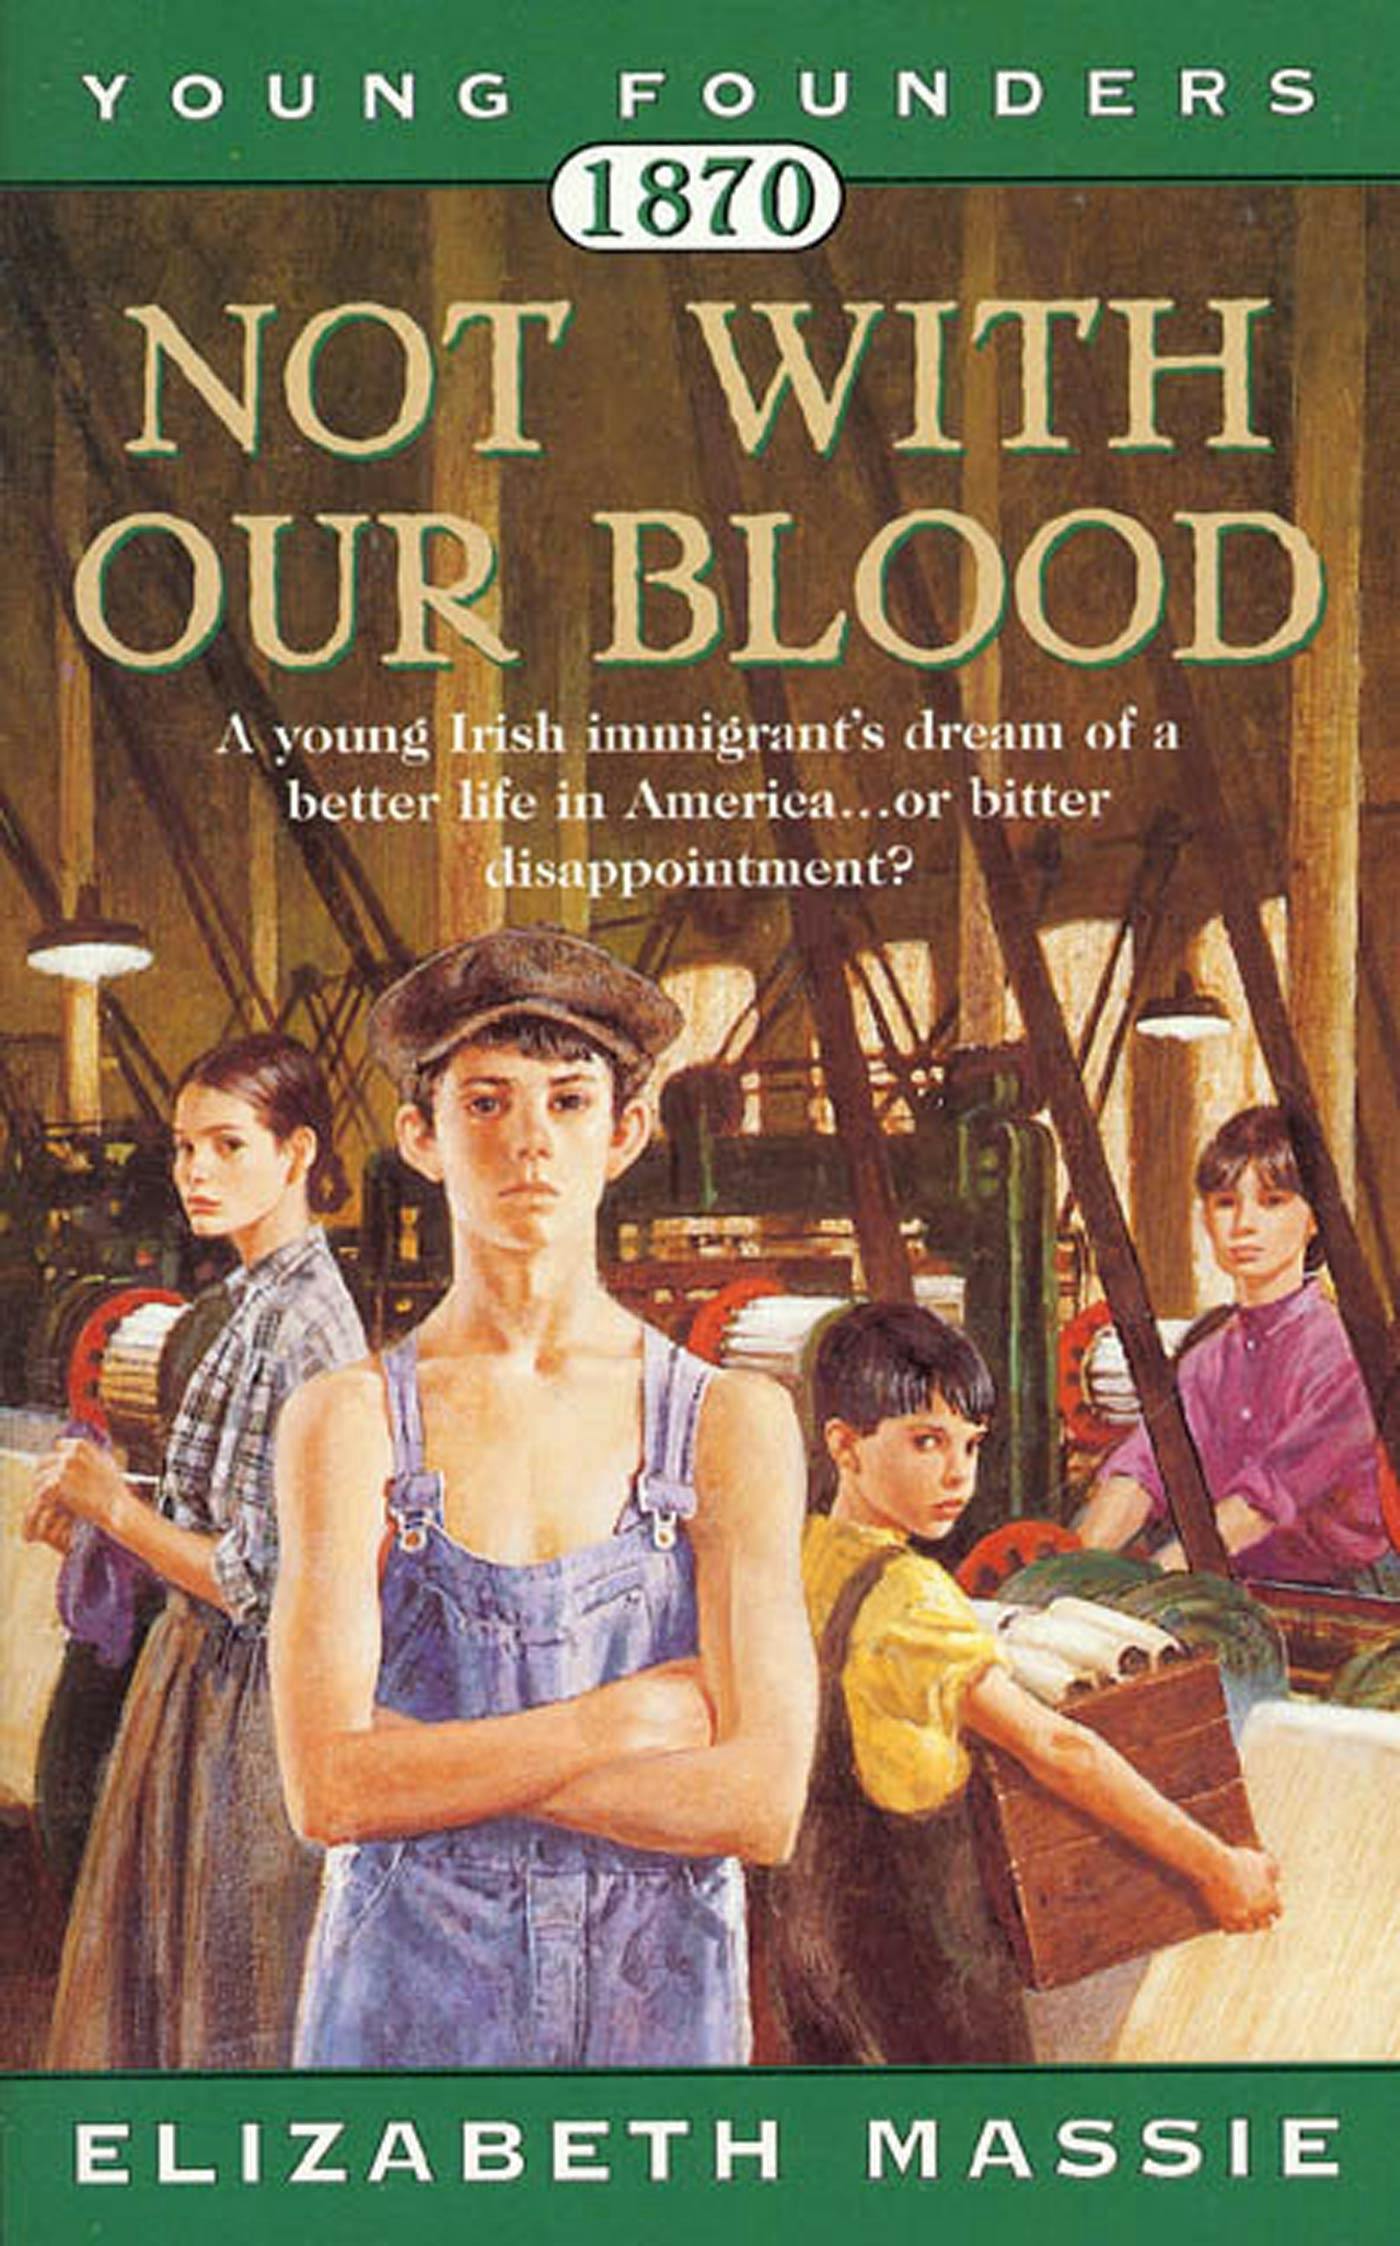 Cover for the book titled as: 1870: Not With Our Blood